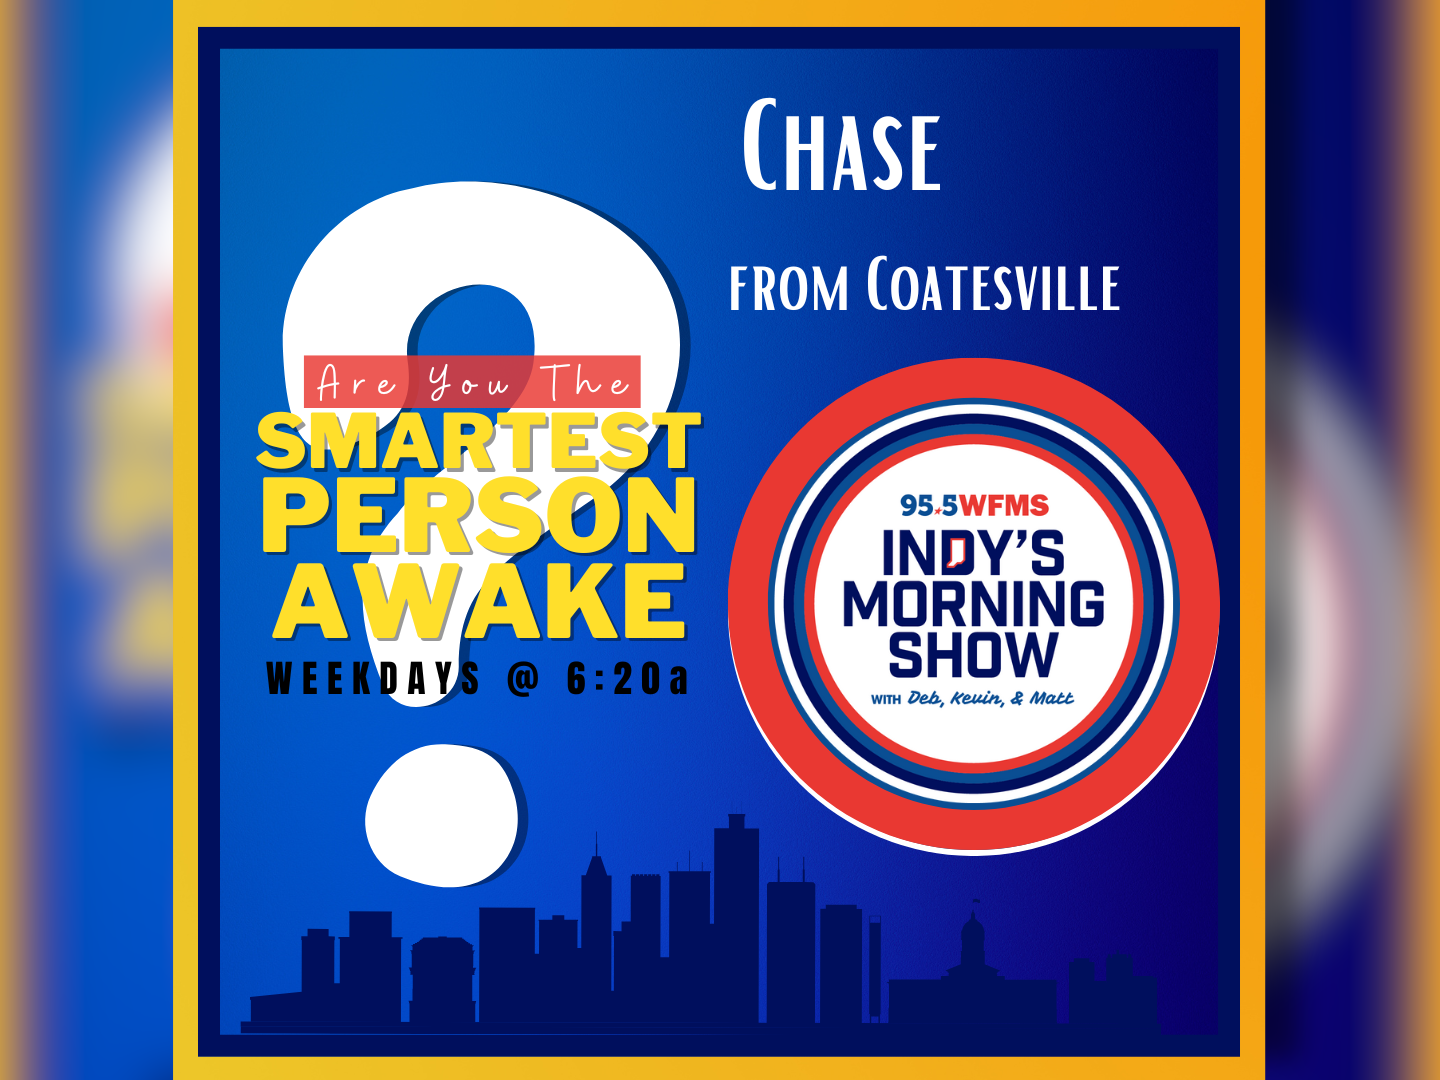 Smartest Person Awake - Chase from Coatesville